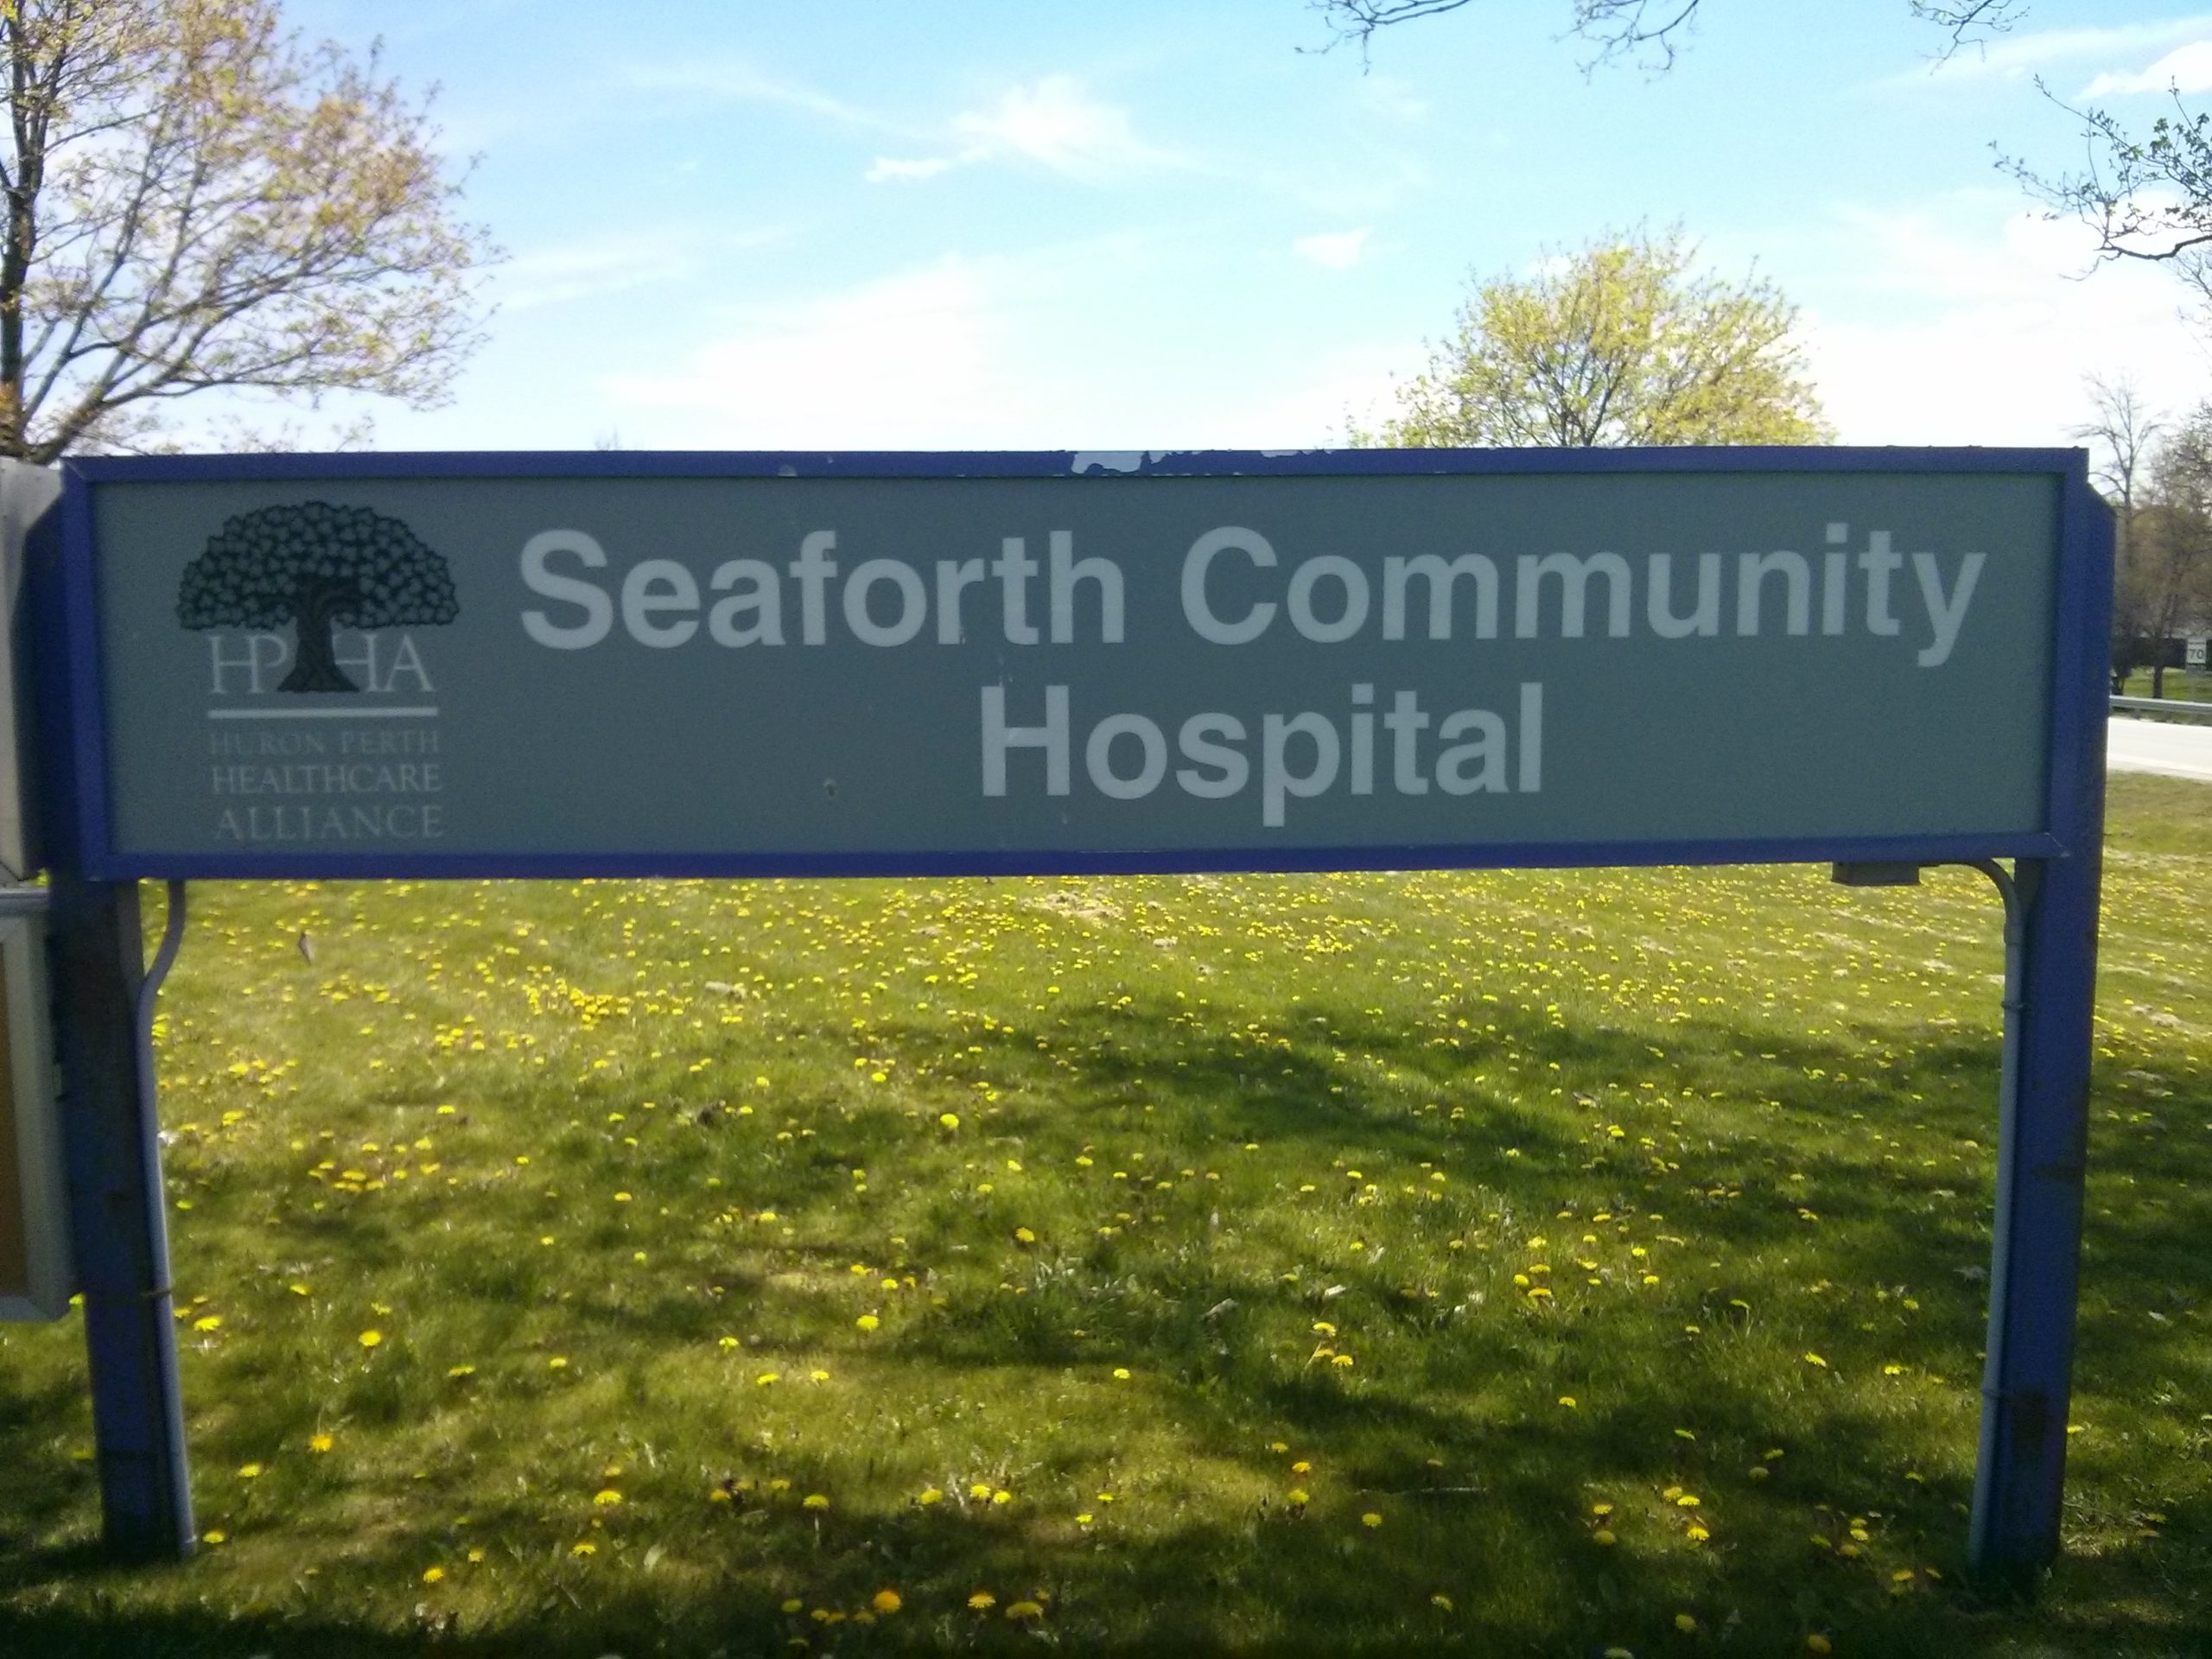 Overnight closure announced at another local emergency department